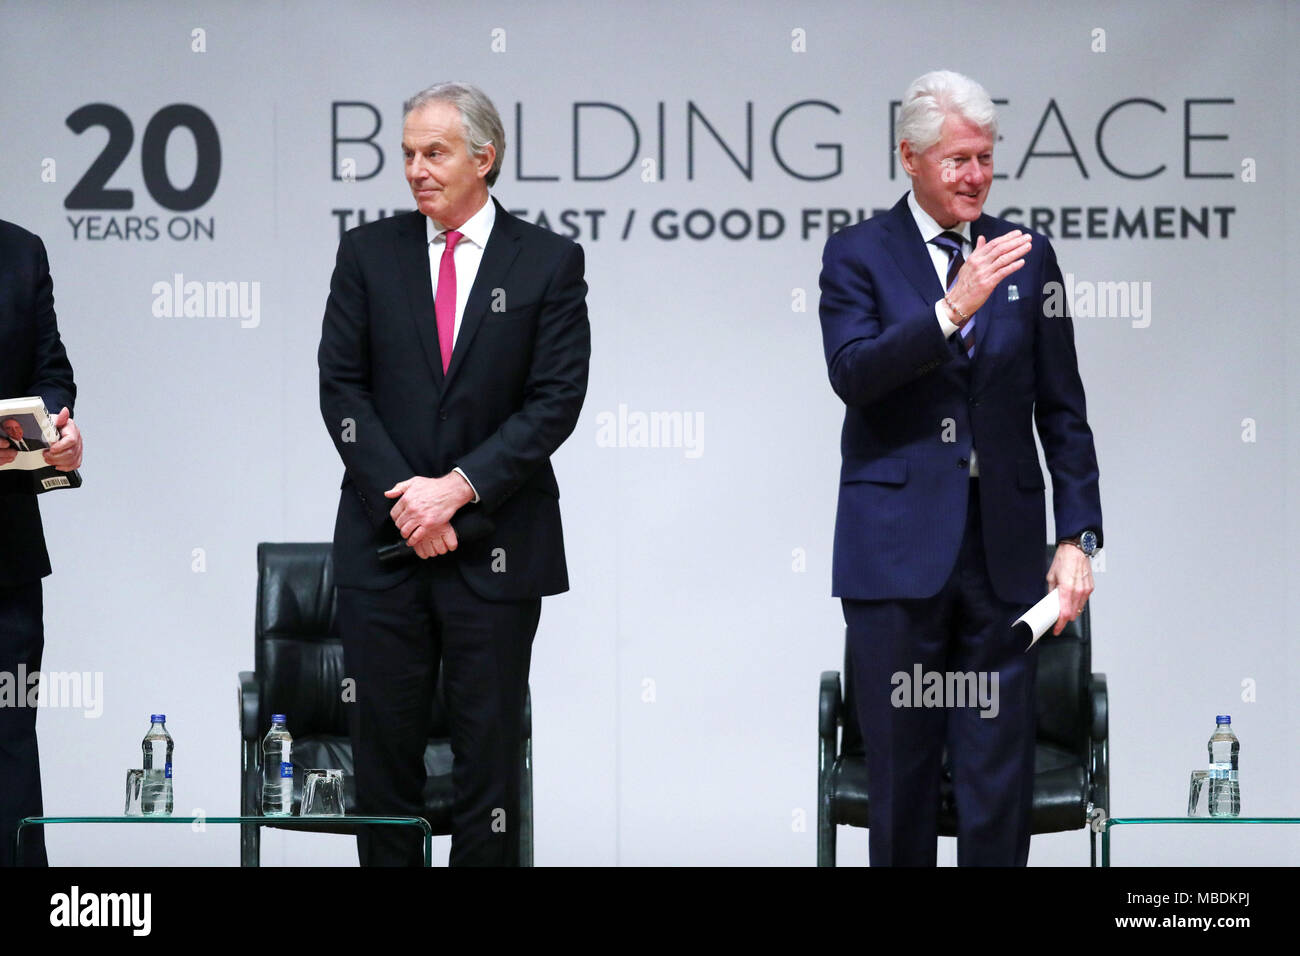 Former Prime Minister Tony Blair and former US President Bill Clinton at an event to mark the 20th anniversary of the Good Friday Agreement, at Queen's University in Belfast. Stock Photo